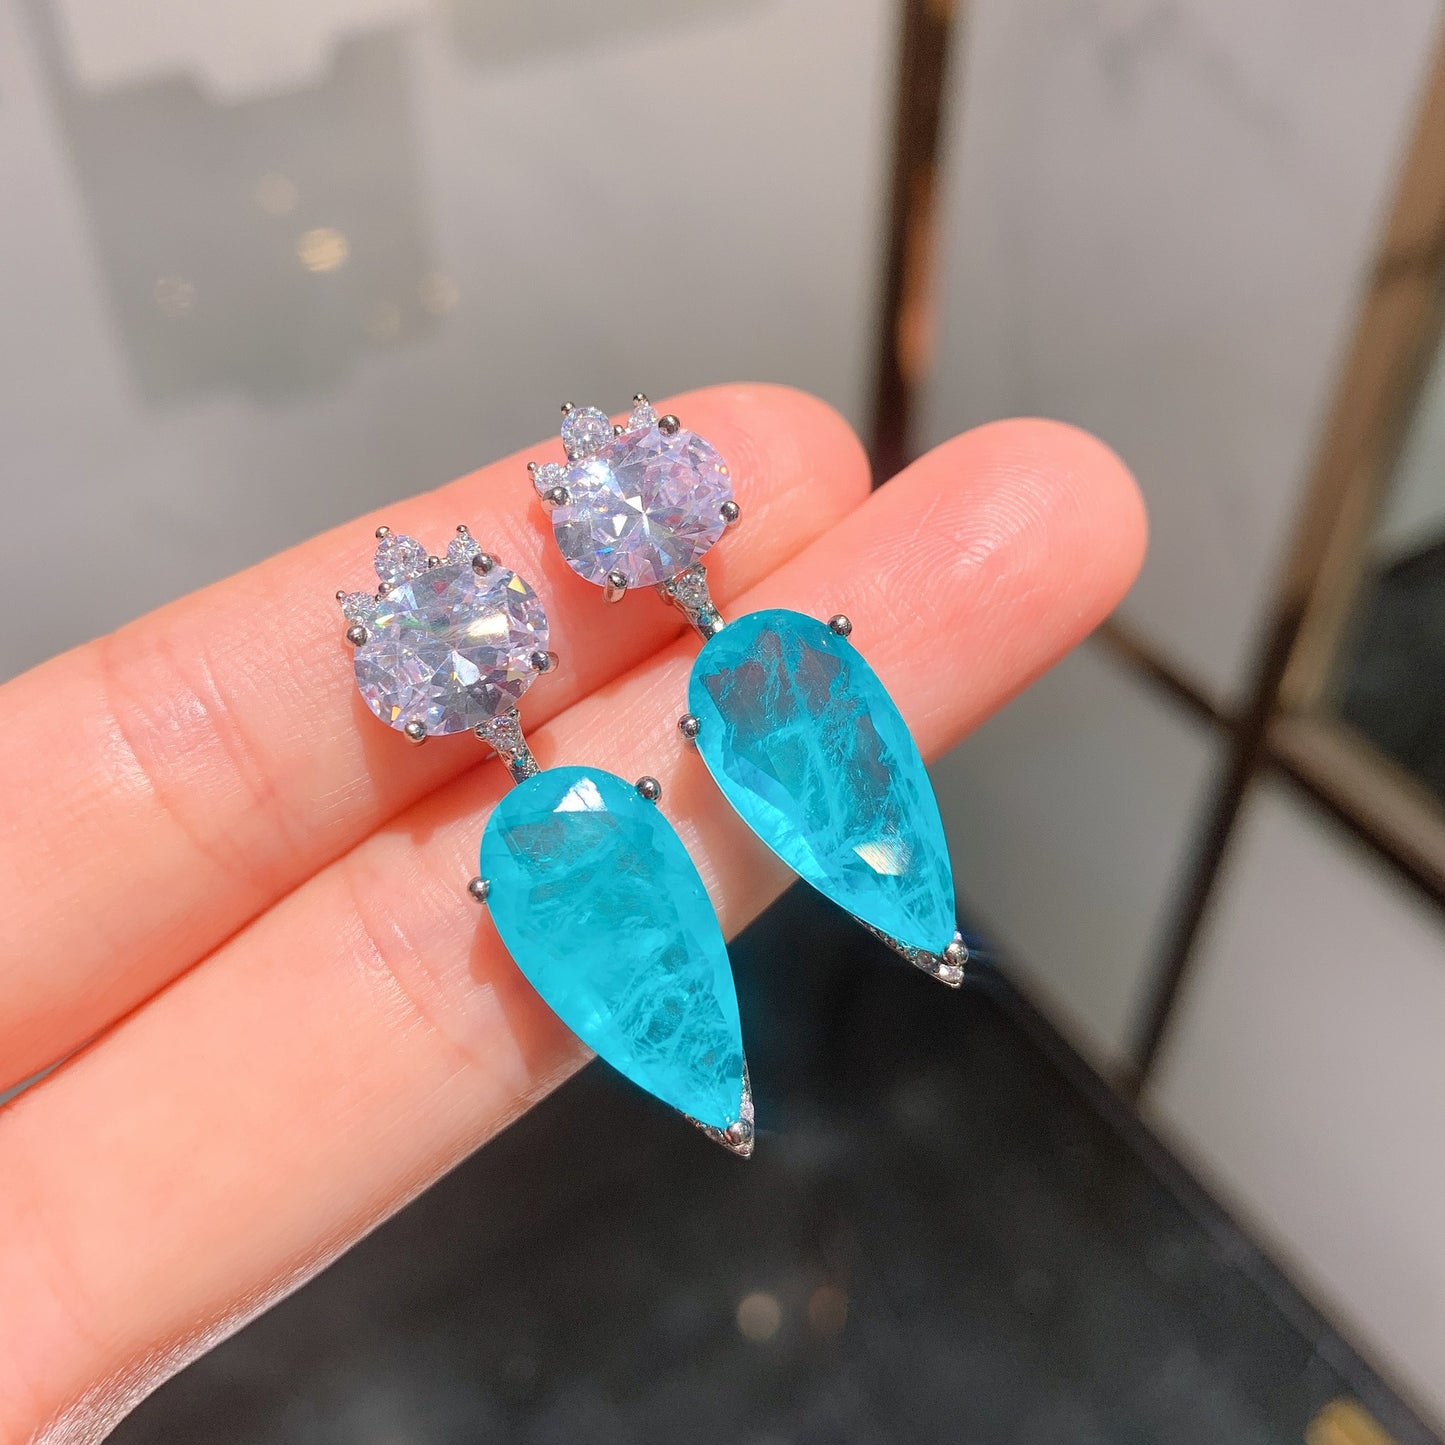 BLUE PARAIBA TOURMALINE Earring Magnificent Cute Earring Art Deco Style Exotic Neon Vivid Blue Color & Glow Ice Blue Color Earring